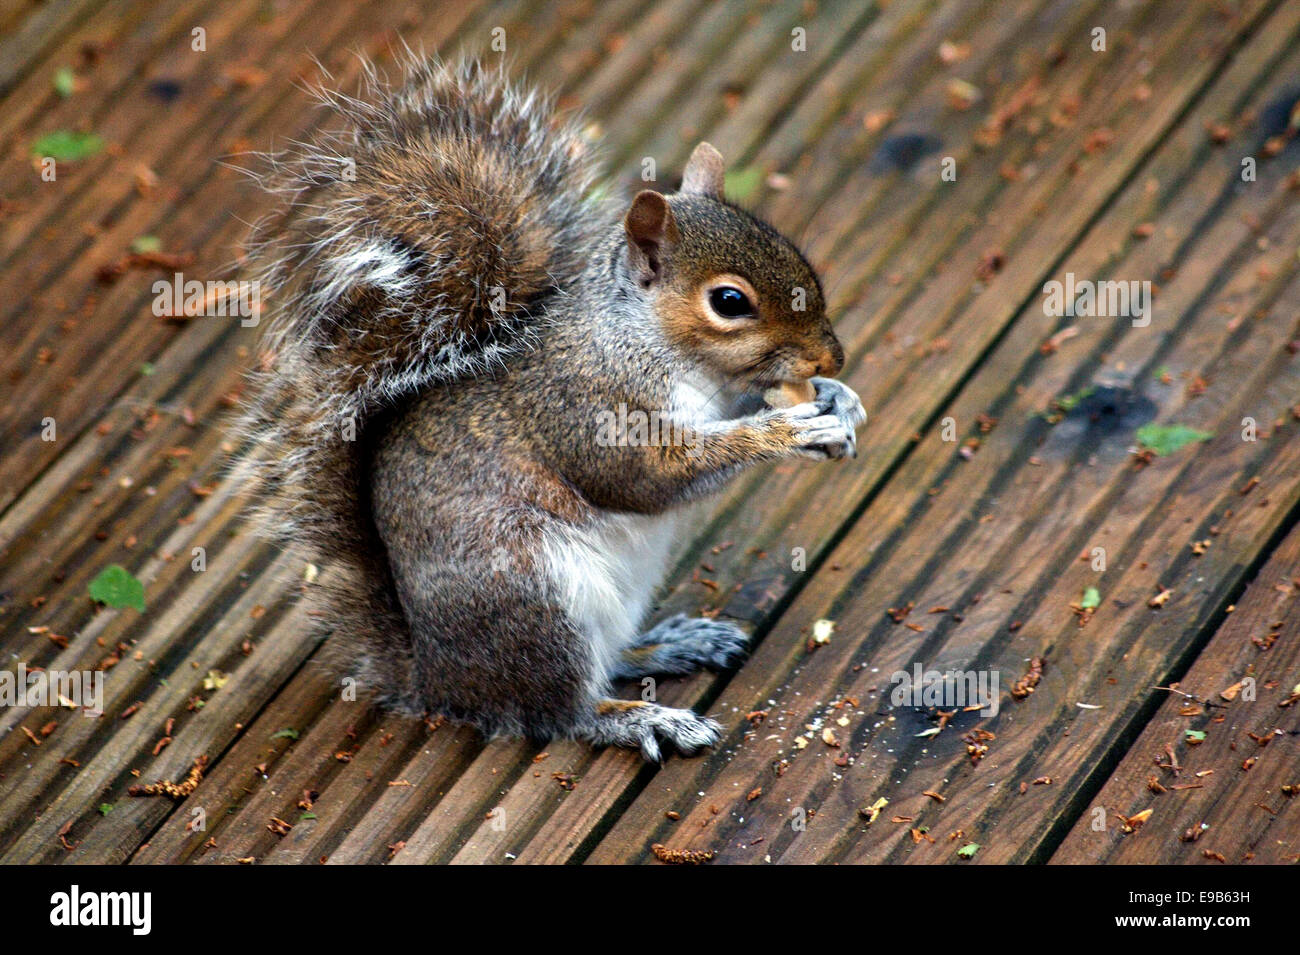 Wee critter found munching at Quarry Walk, Cheadle, England Stock Photo